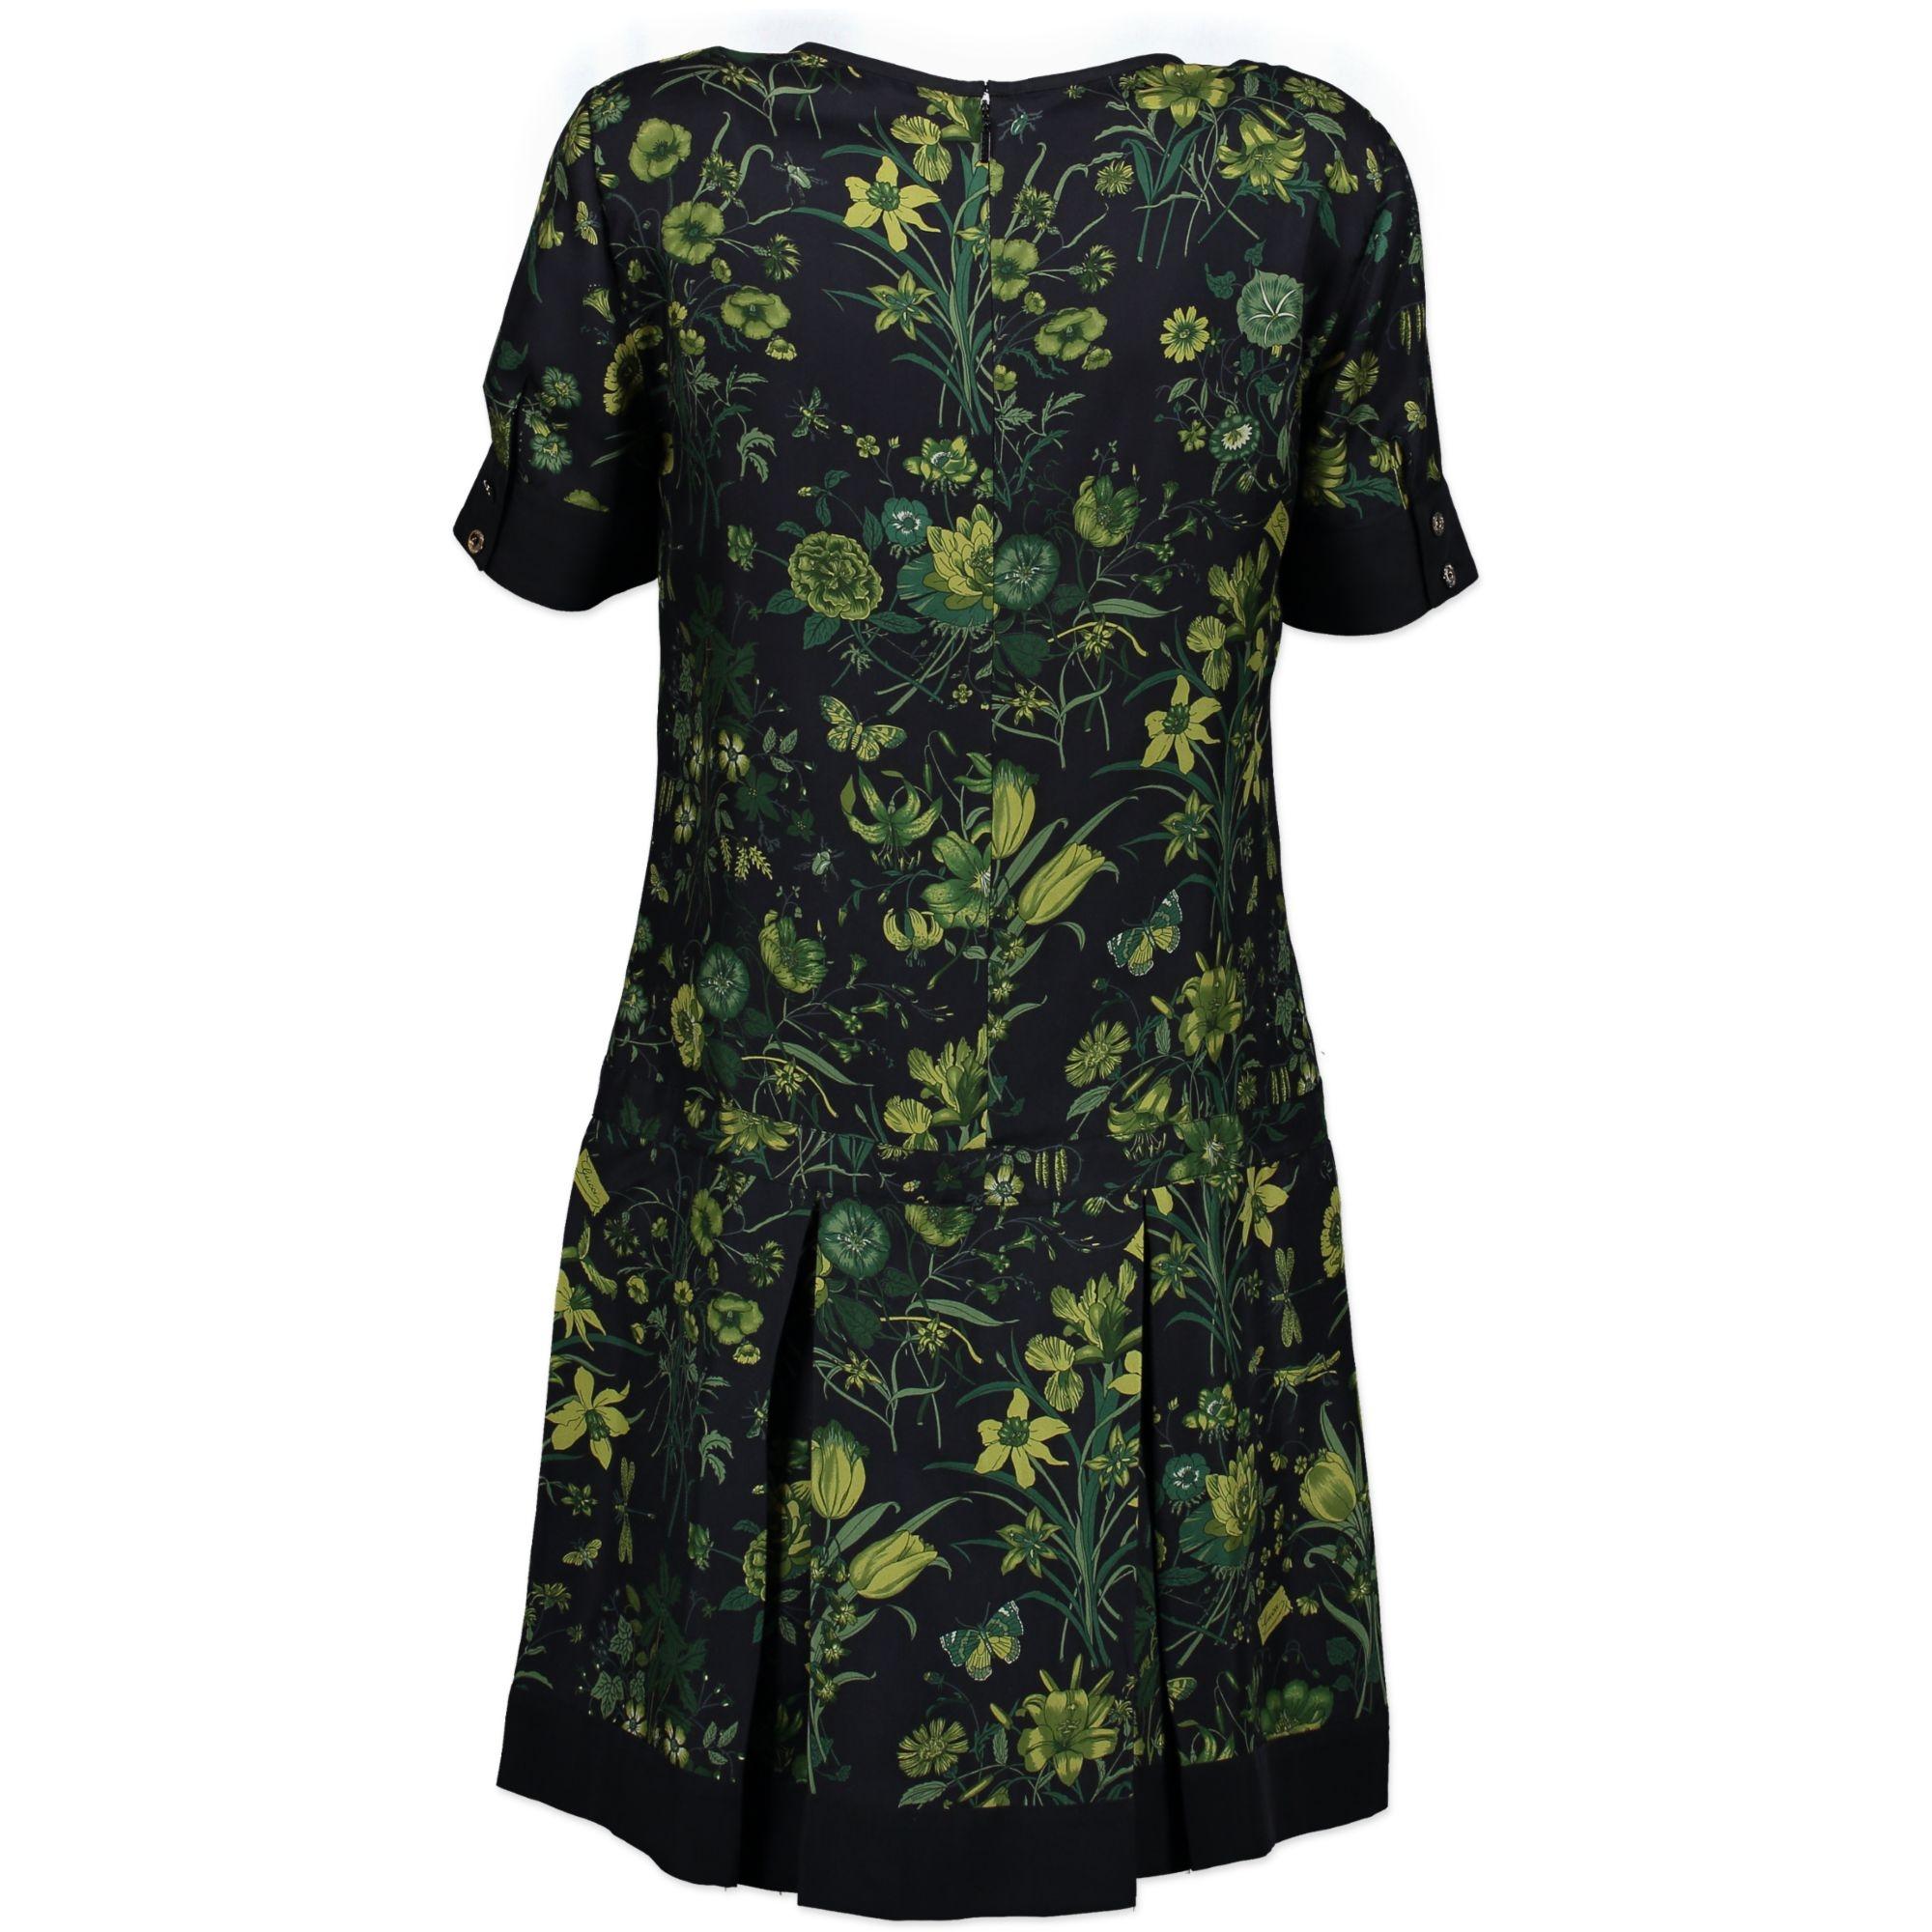 Excellent condition

Gucci Green Floral Bamboo Dress - IT Size 38

Give your wardrobe a floral touch for spring with this Gucci dress. It features a green floral print on a black backdrop that is ideal for spring. There are bamboo details on the